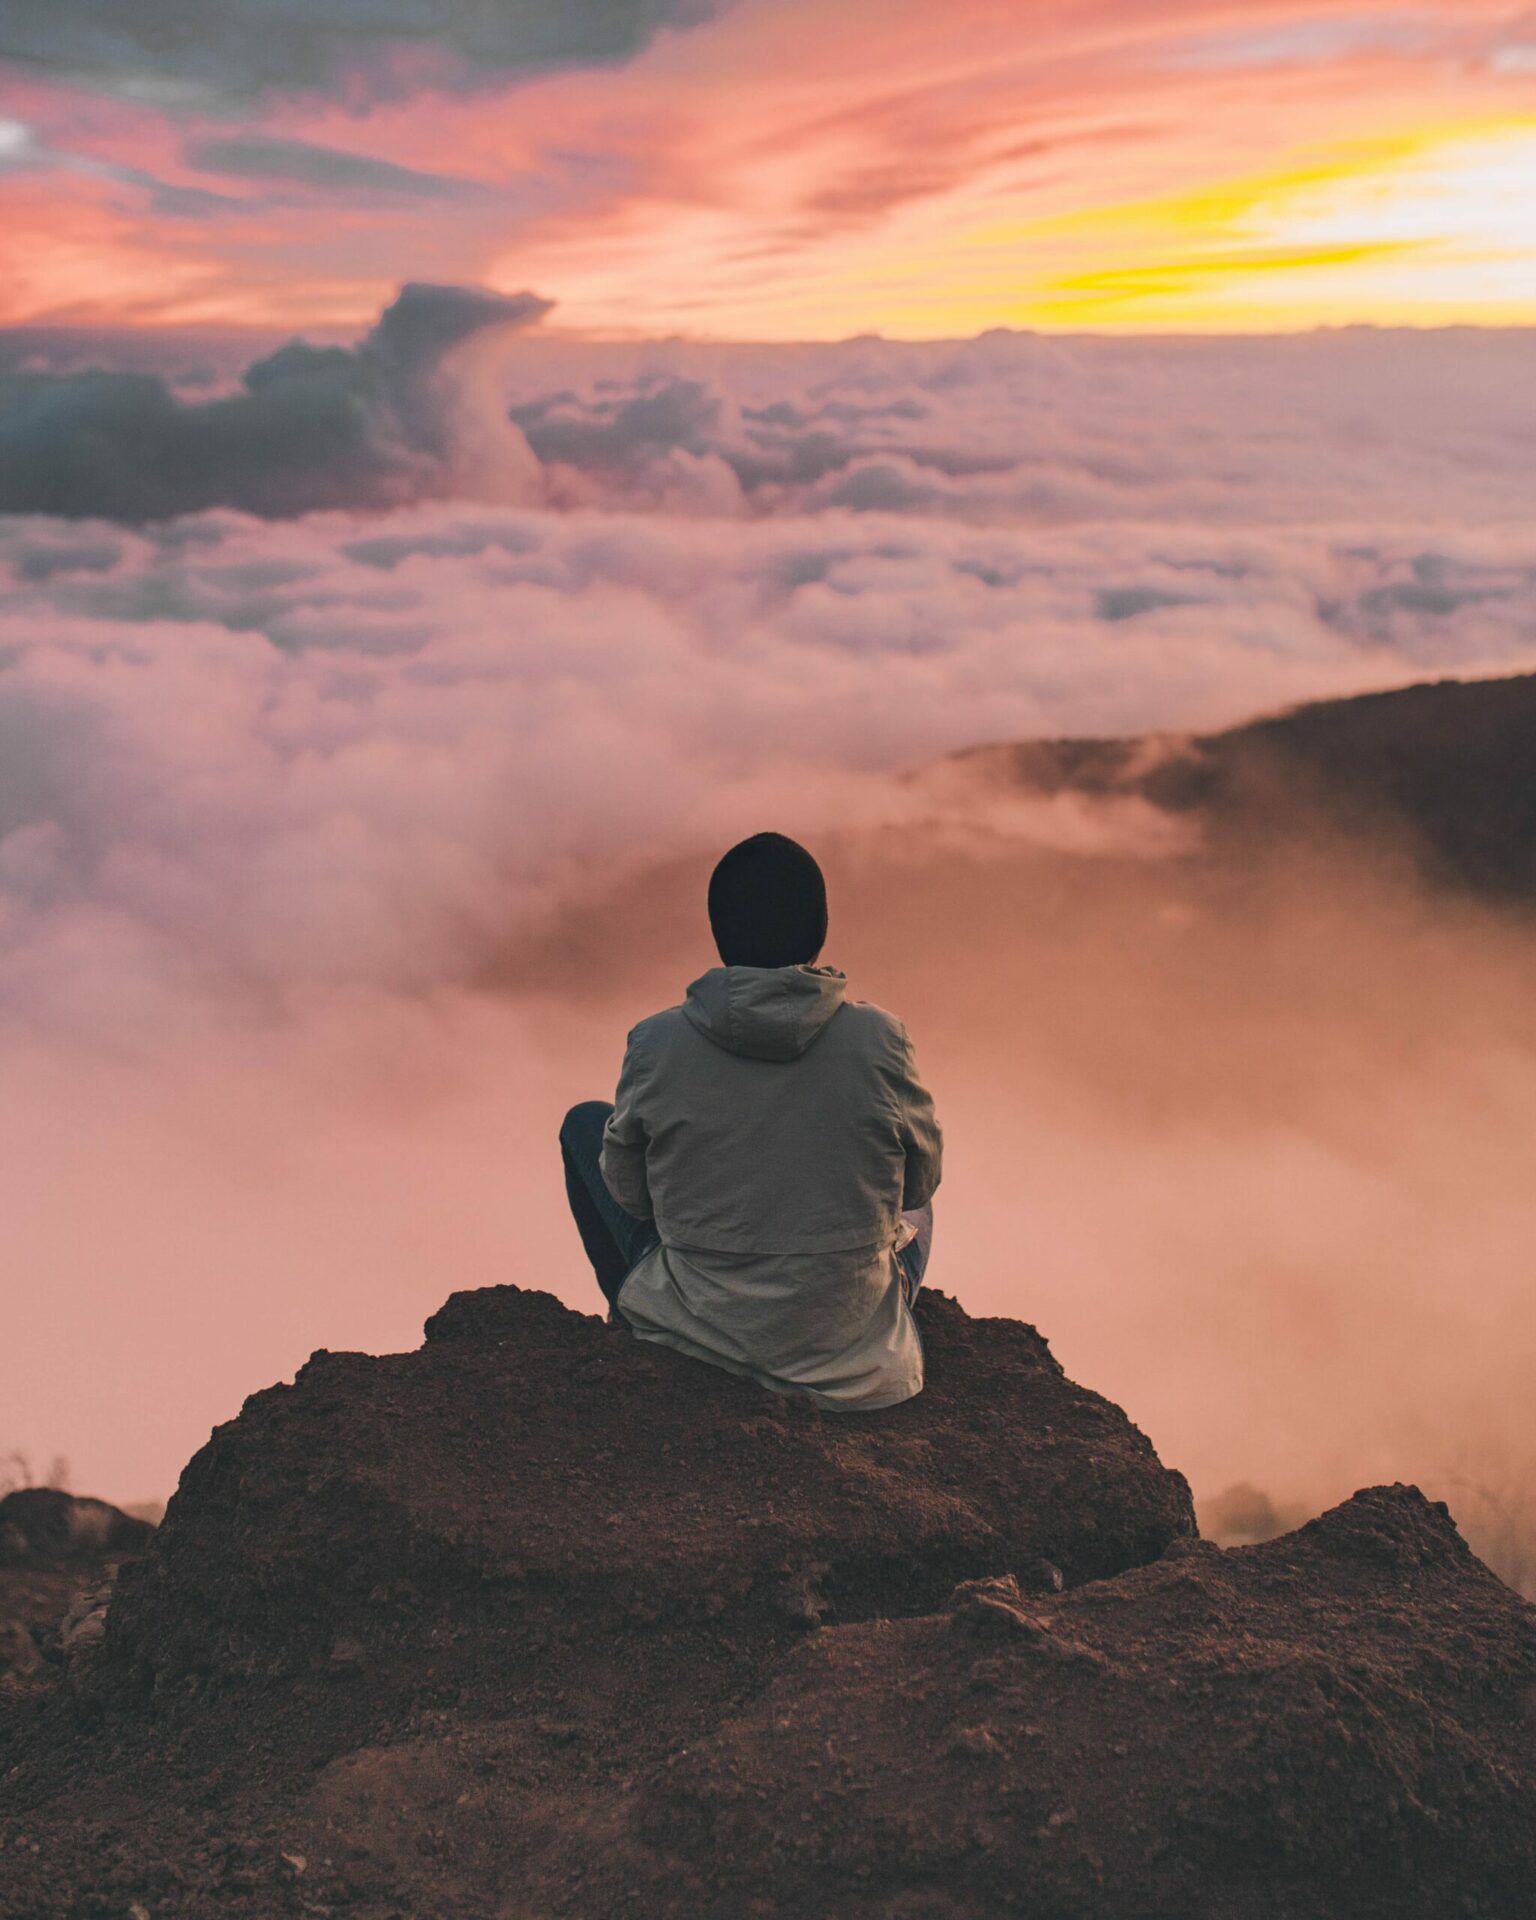 Boy with black cap sits on a rock above the clouds and enjoys the view